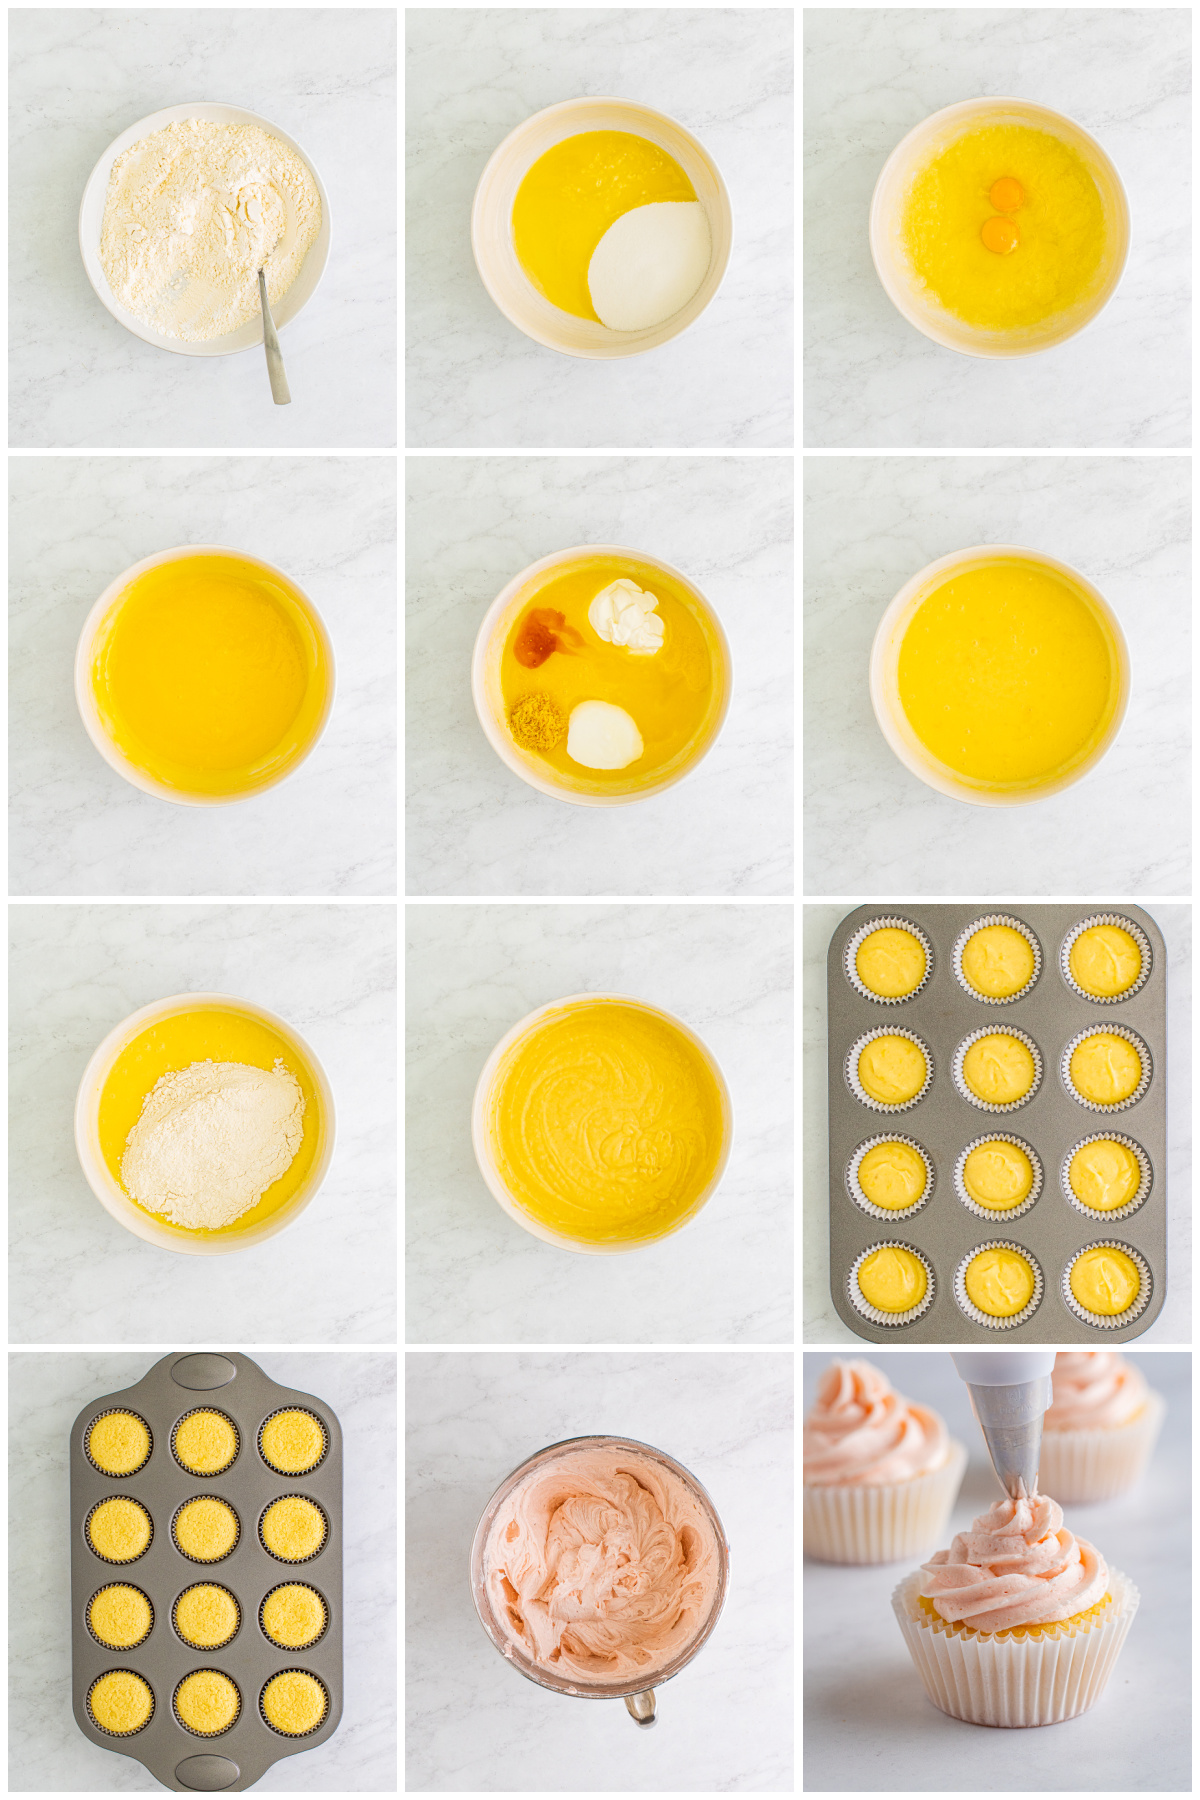 Step by step photos on how to make Lemon Cupcakes.